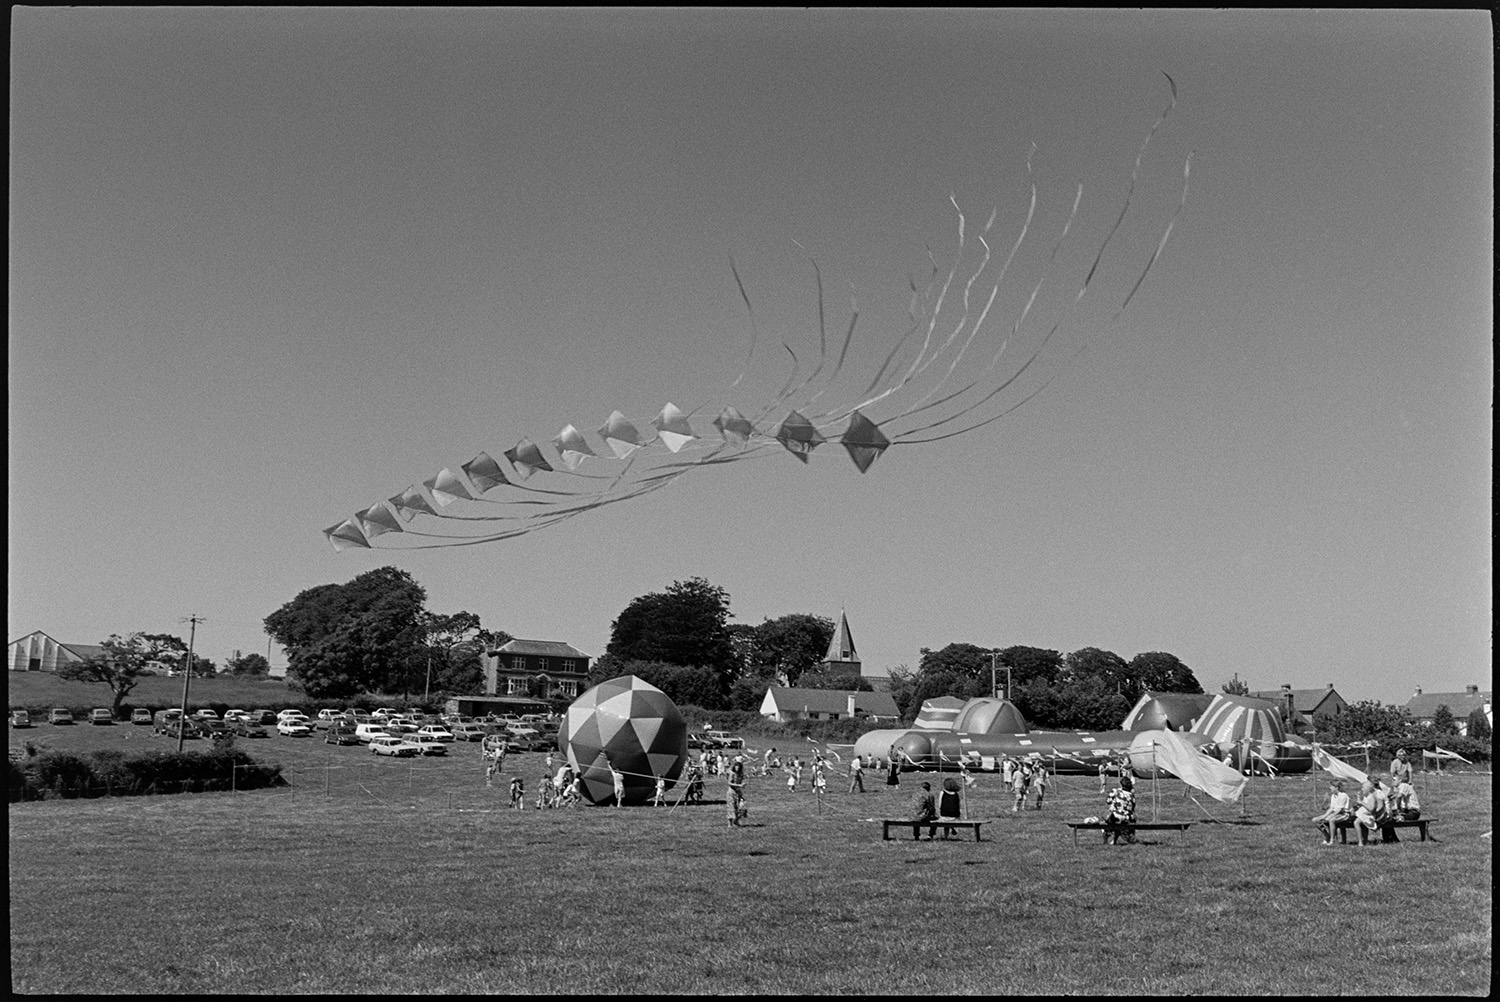 Balloons and kites at Revel.
[Kite display and bouncy castles at the Beaford Revel. Families are sitting on benches watching the display and children are playing. A large number of parked cars are visible in the background.]